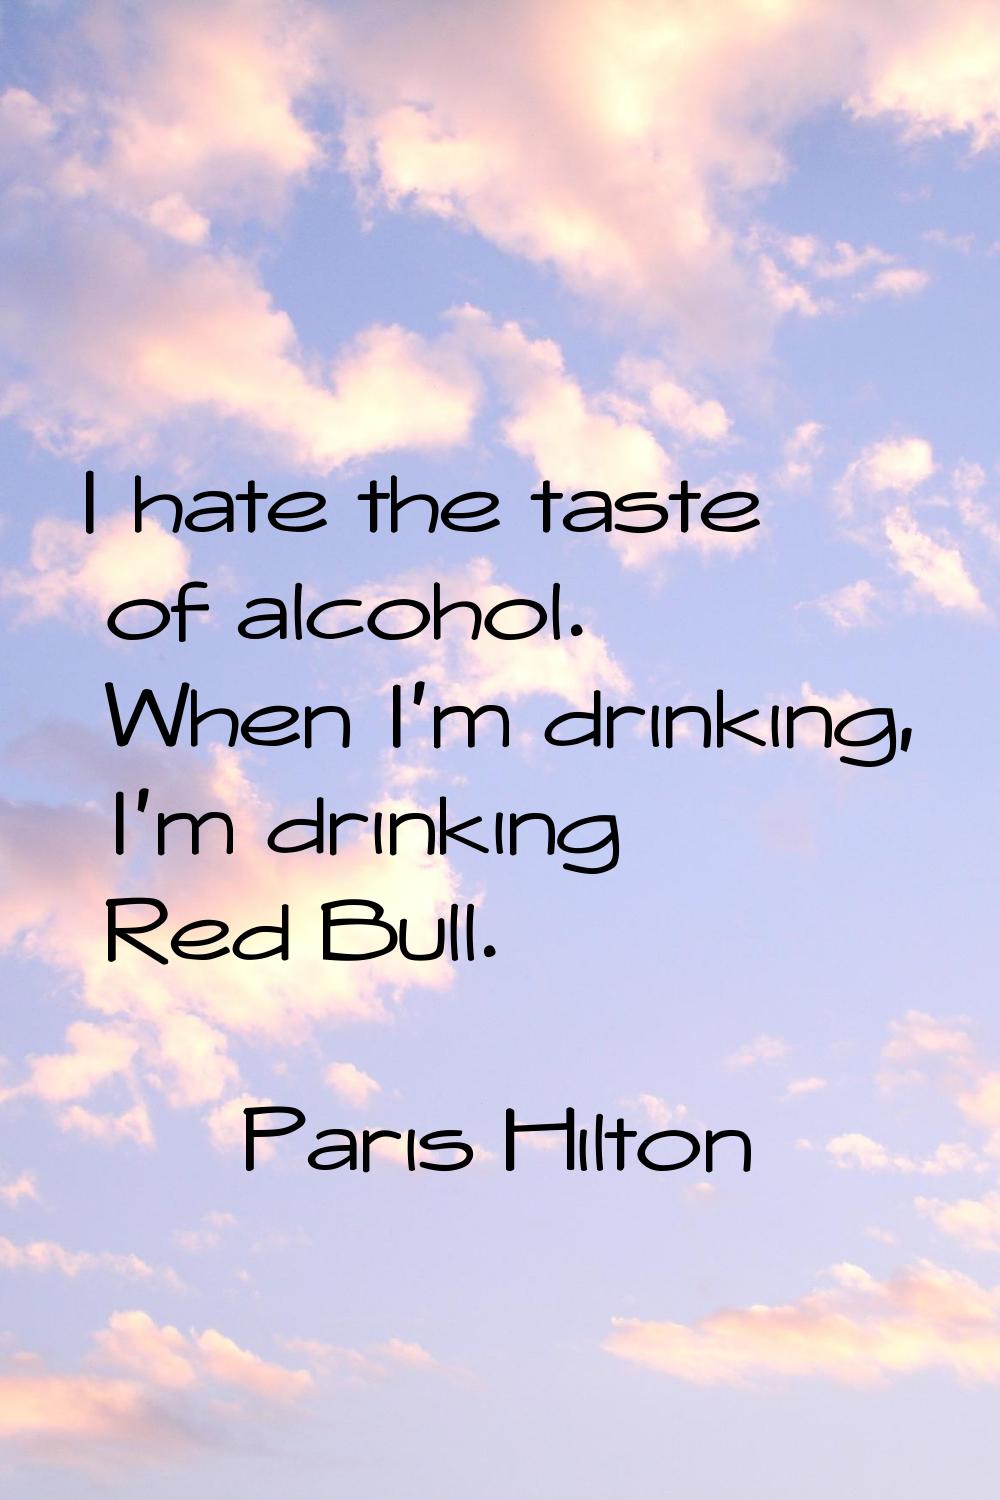 I hate the taste of alcohol. When I'm drinking, I'm drinking Red Bull.